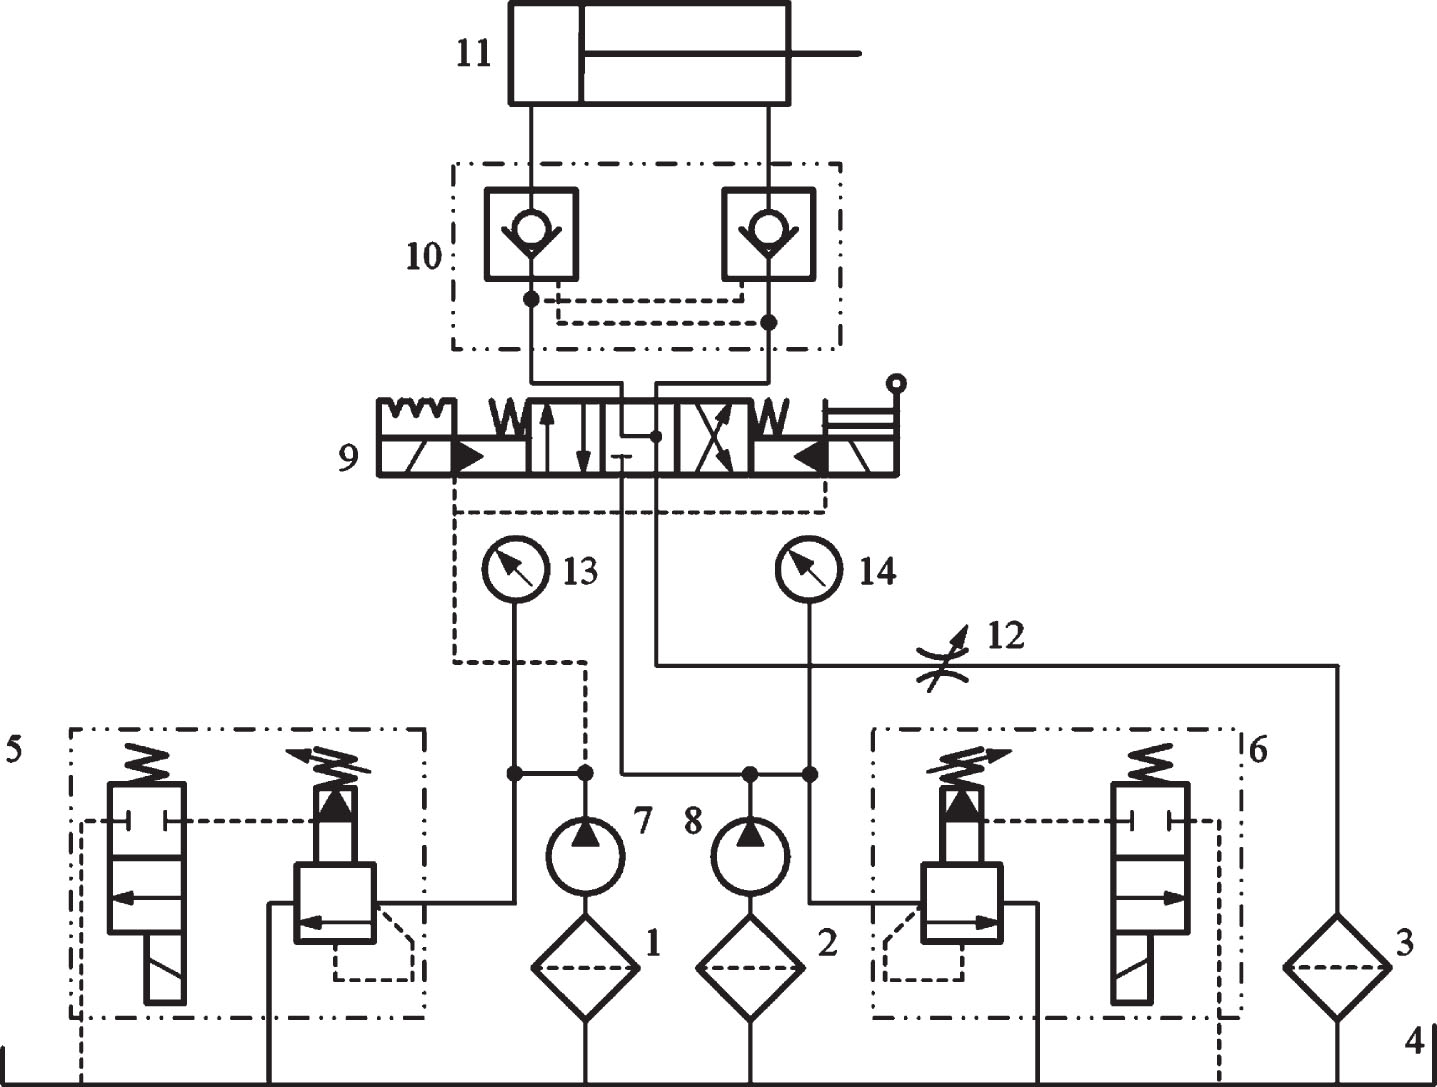 Principal diagram of hydraulic height adjustment system.